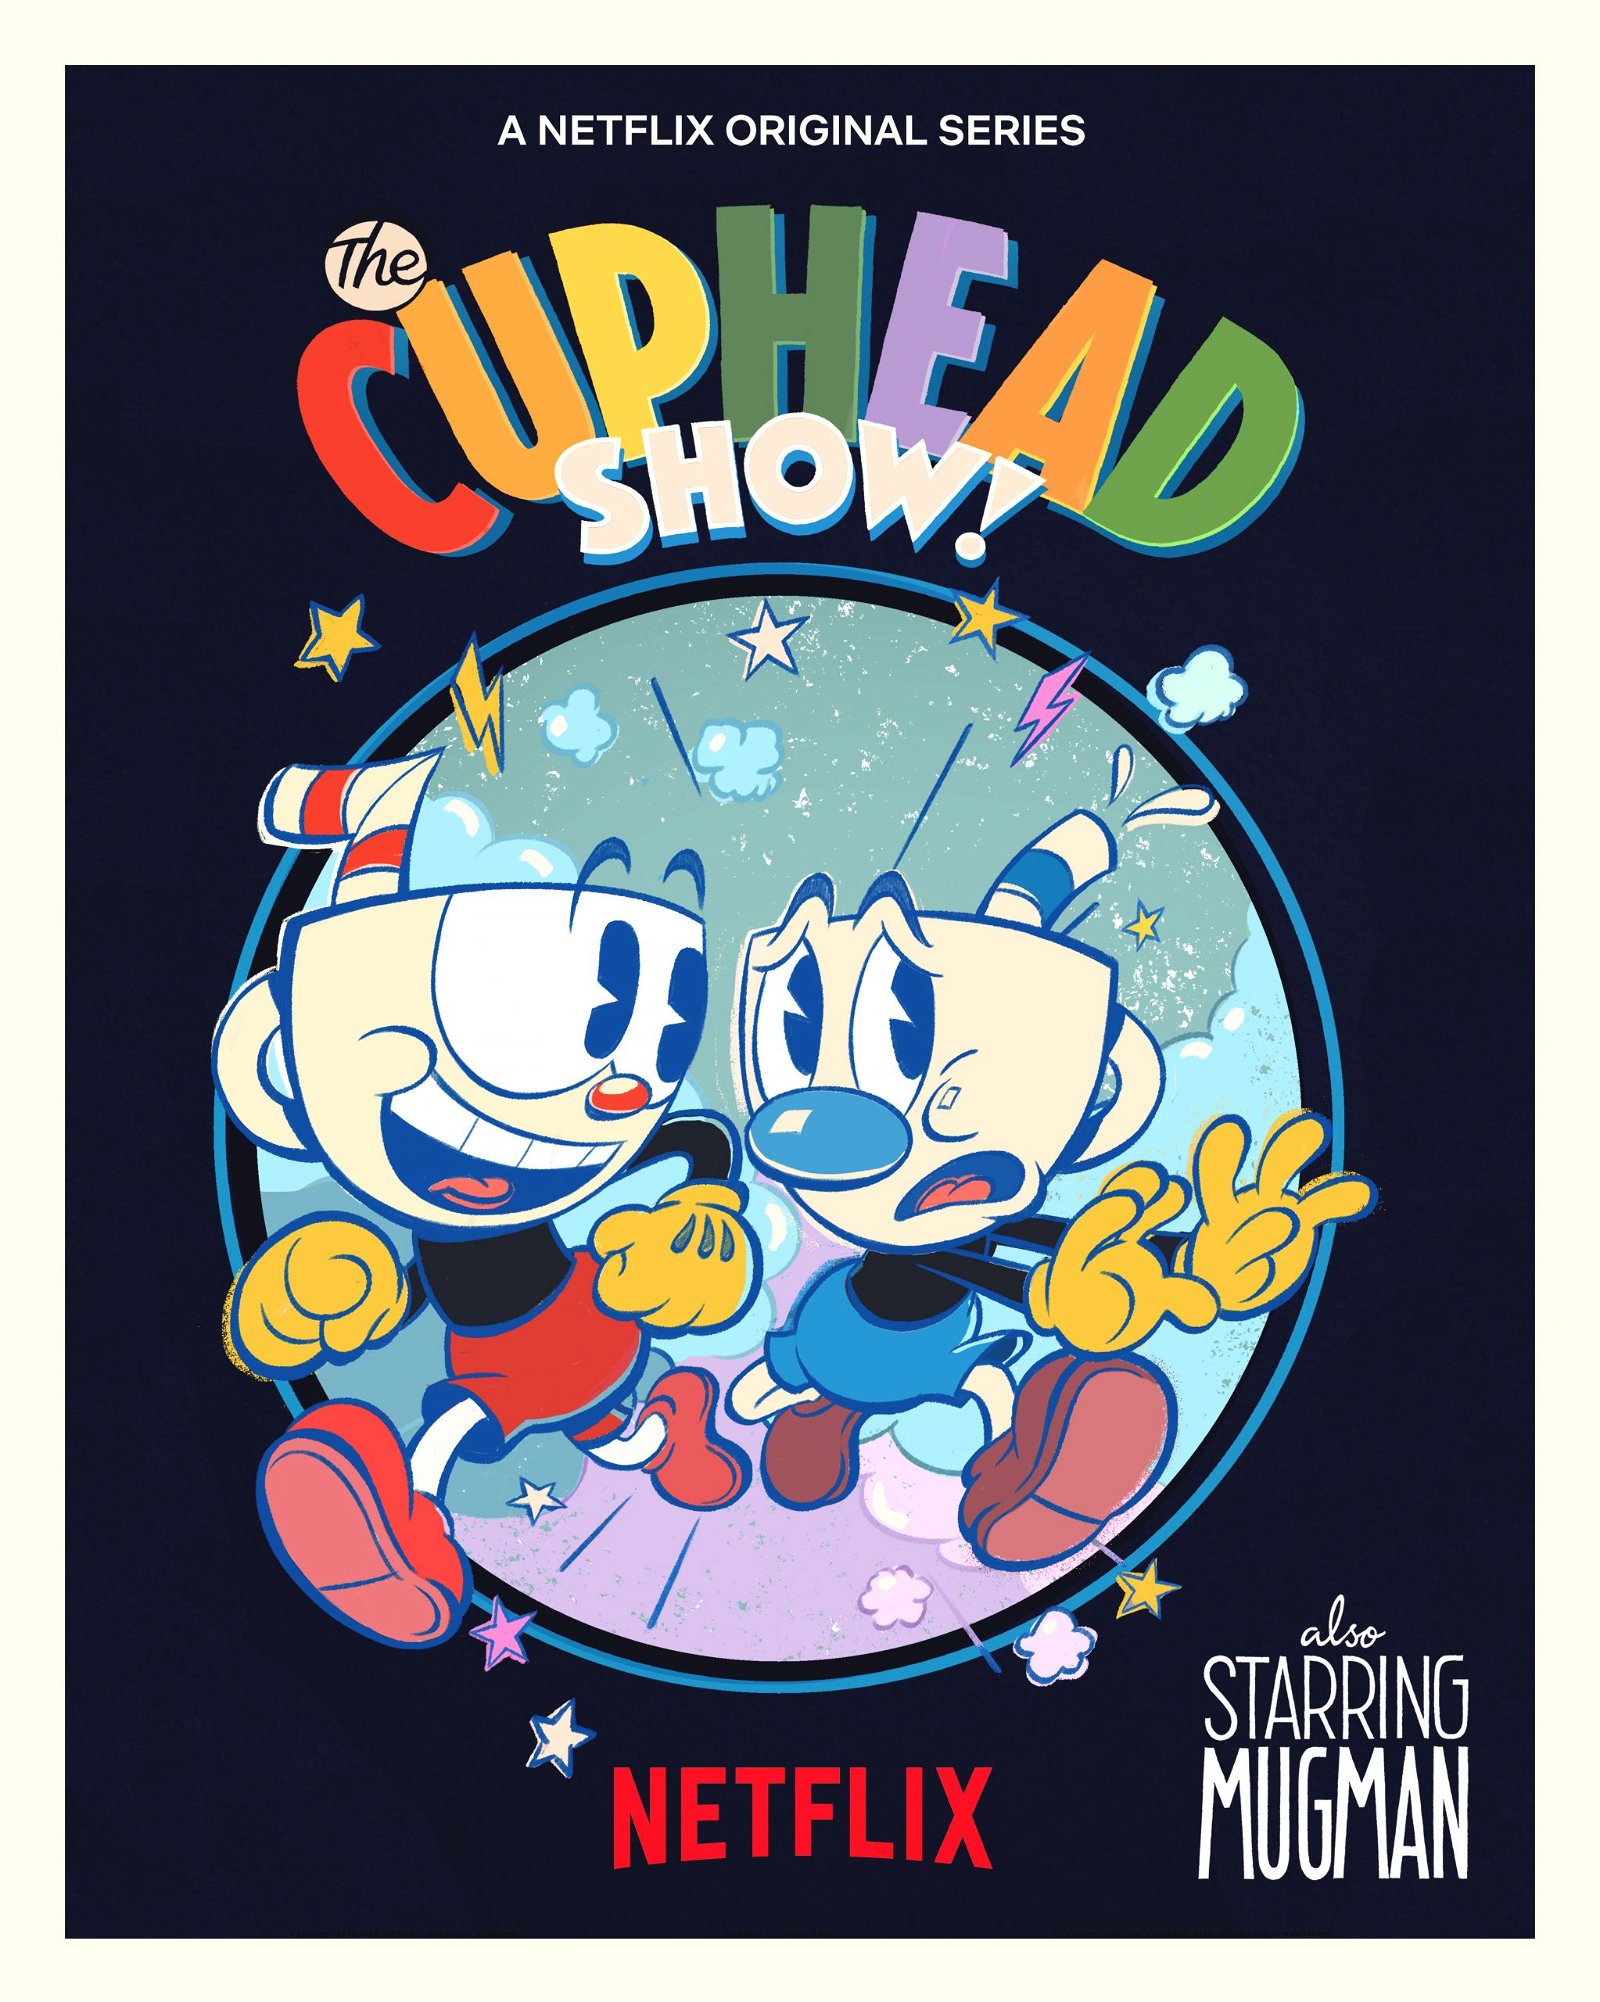 The Cuphead Show poster